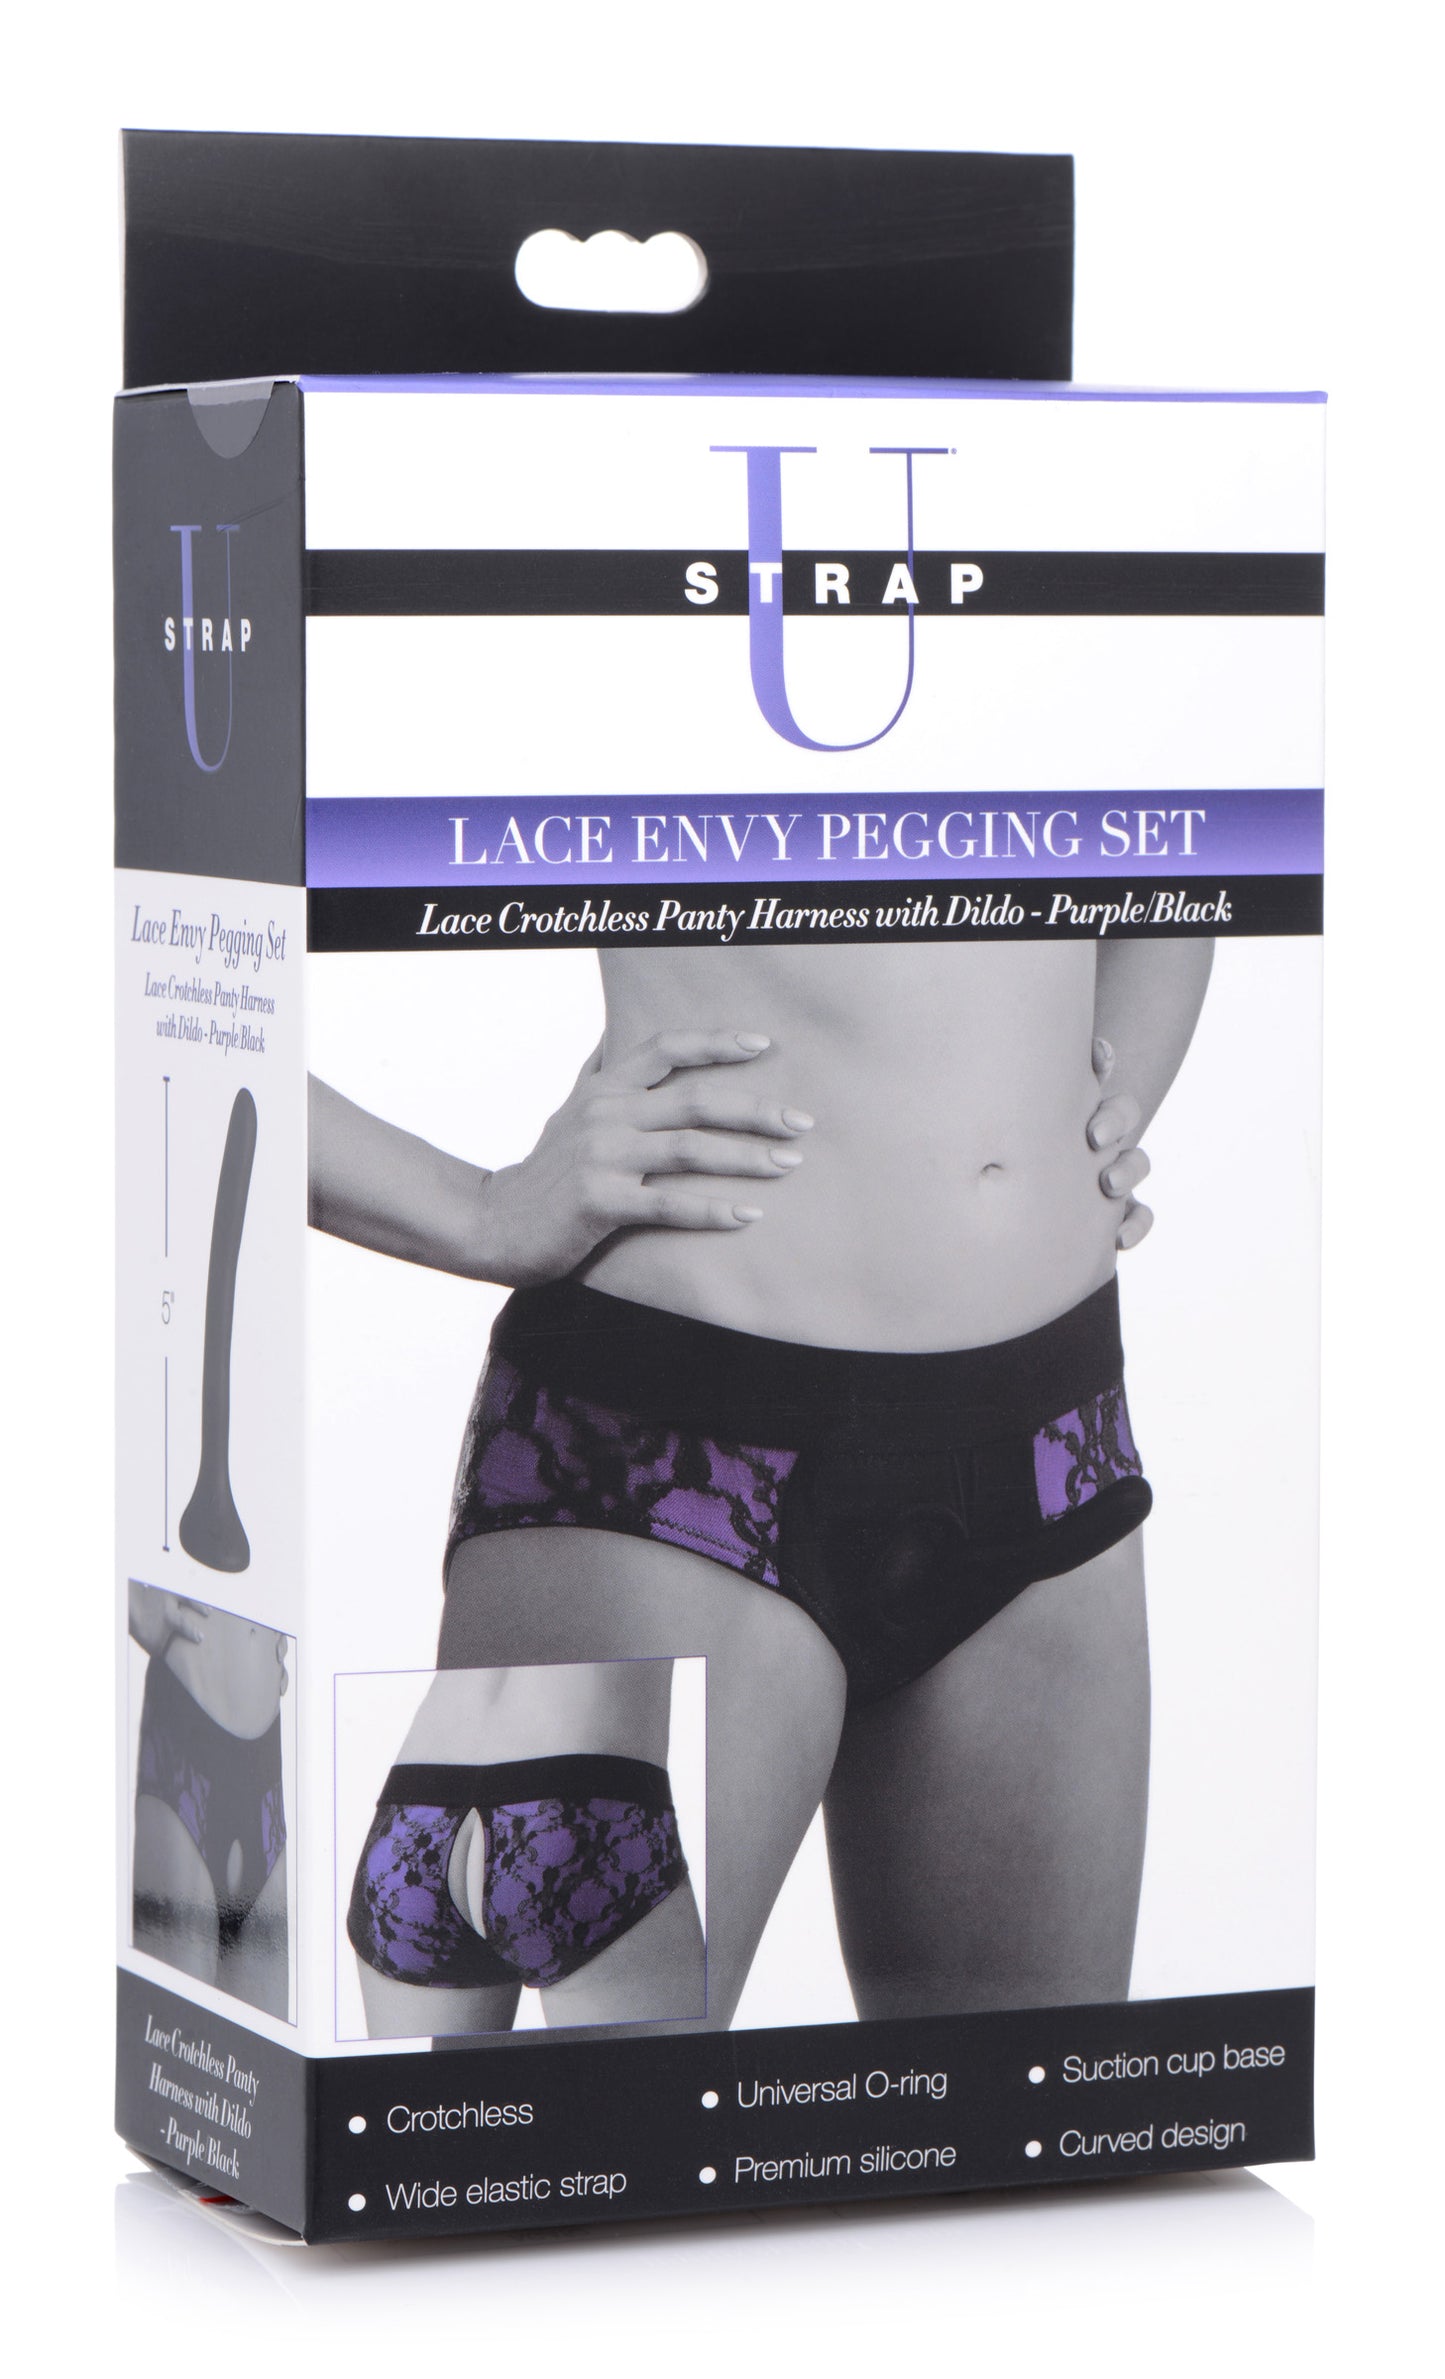 Lace Envy Pegging Set with Lace Crotchless Panty Harness and Dildo - L-XL - UABDSM